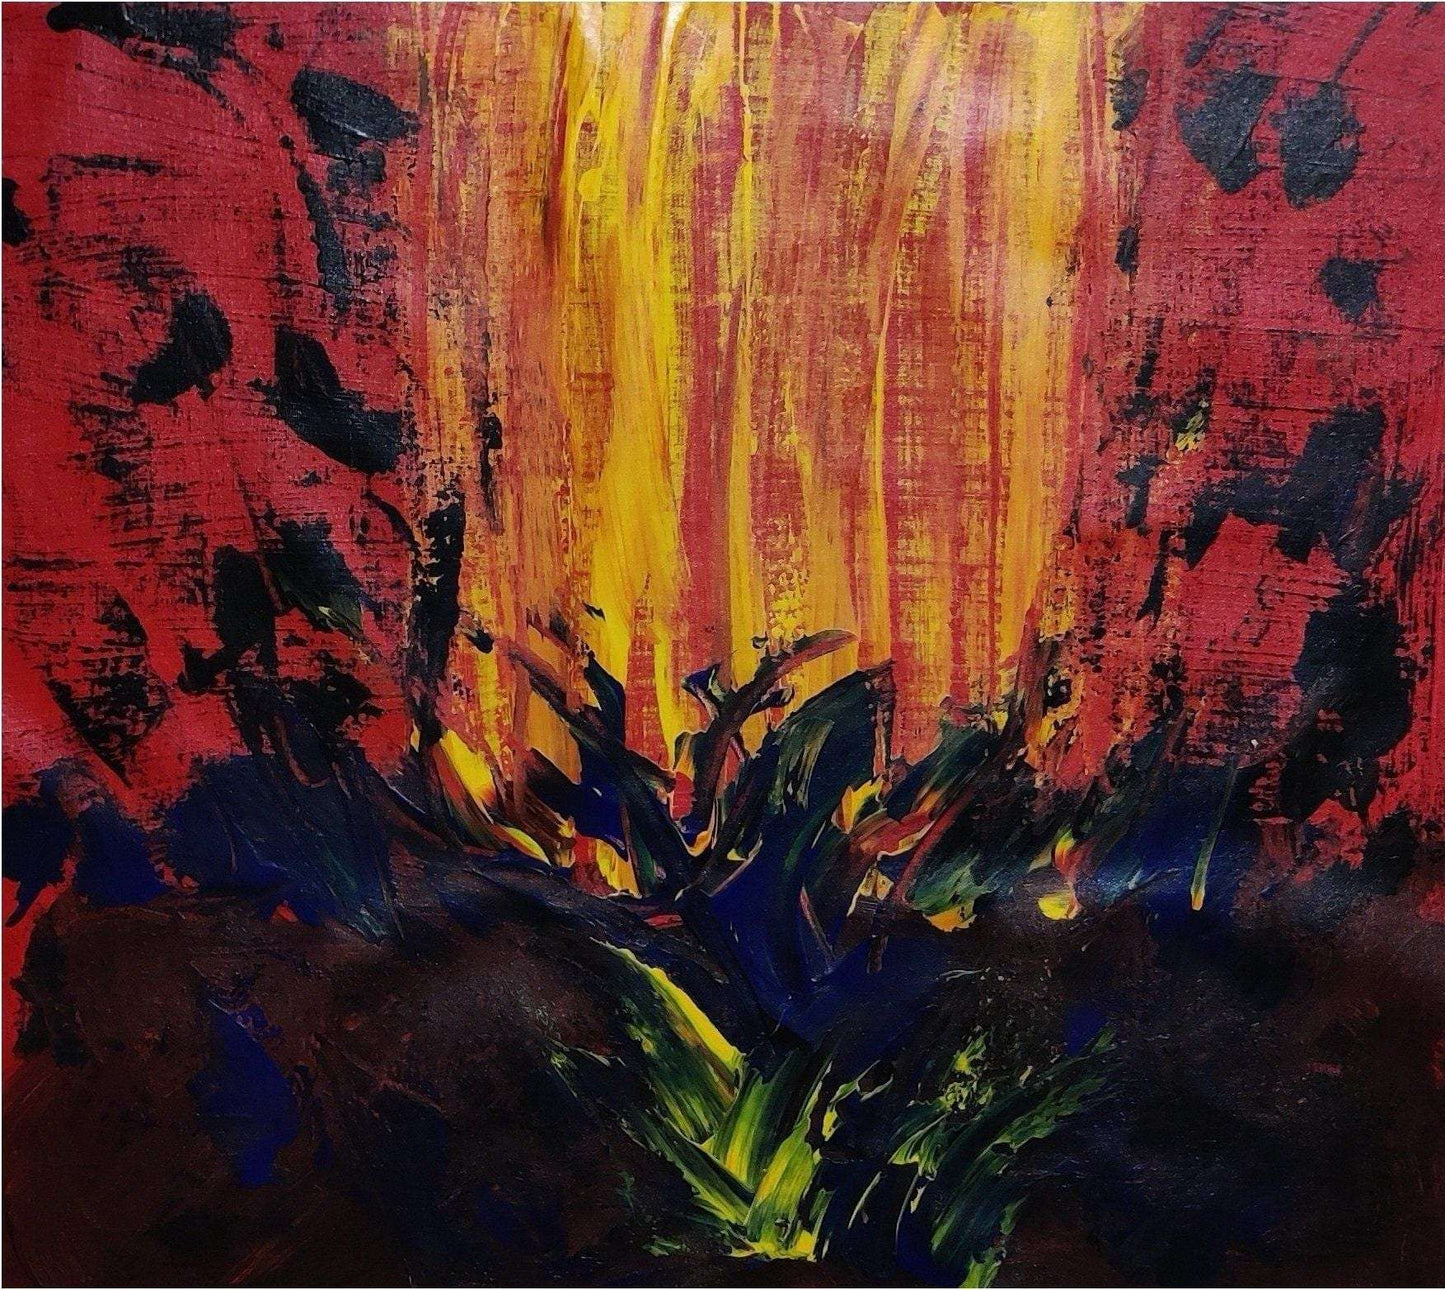 Fire Within - Acrylic on canvas painting Writings On The Wall Oil Painting